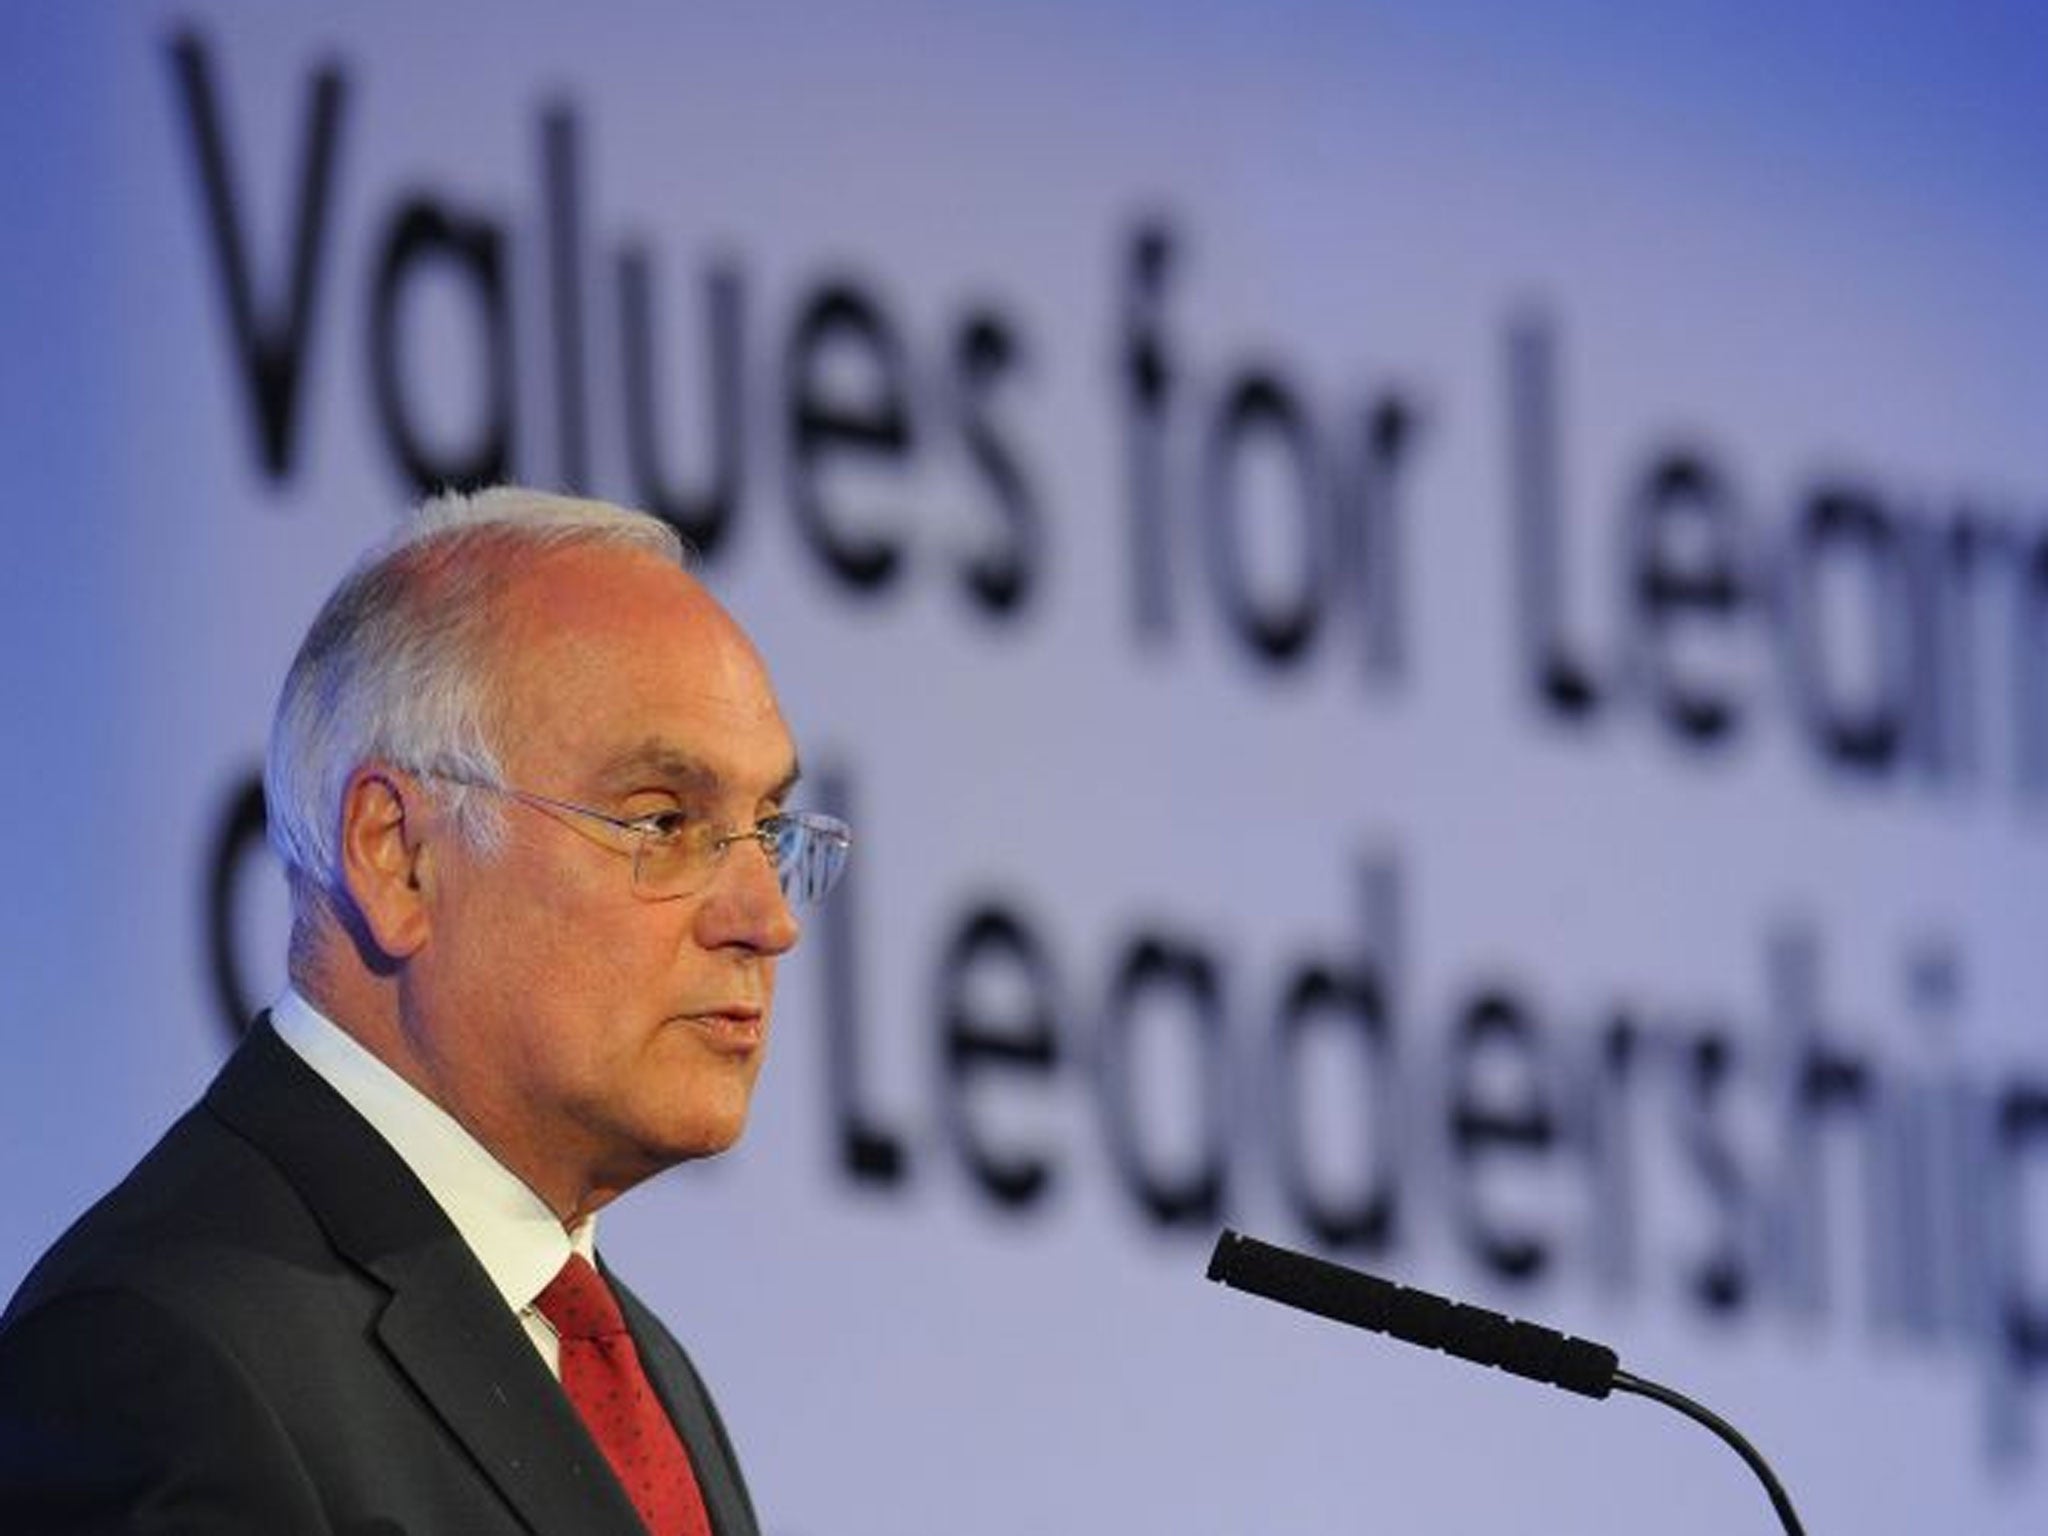 Chief Inspector of Schools in England and Head of Ofsted Sir Michael Wilshaw gives a speech during the ASCL Annual Conference at the Hilton Metropole, Birmingham